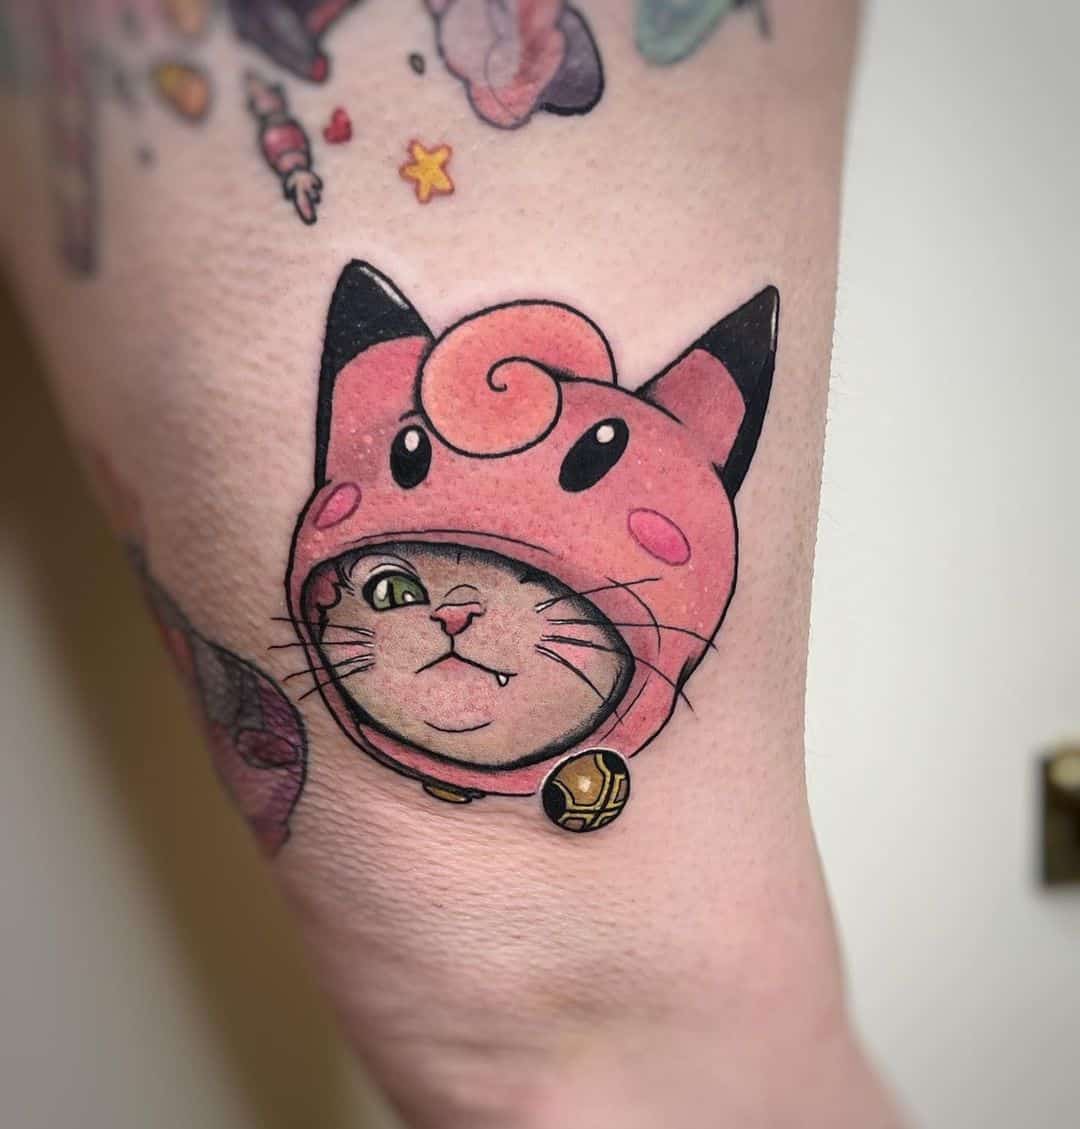 Cute cat design on thigh by mrspopsicle